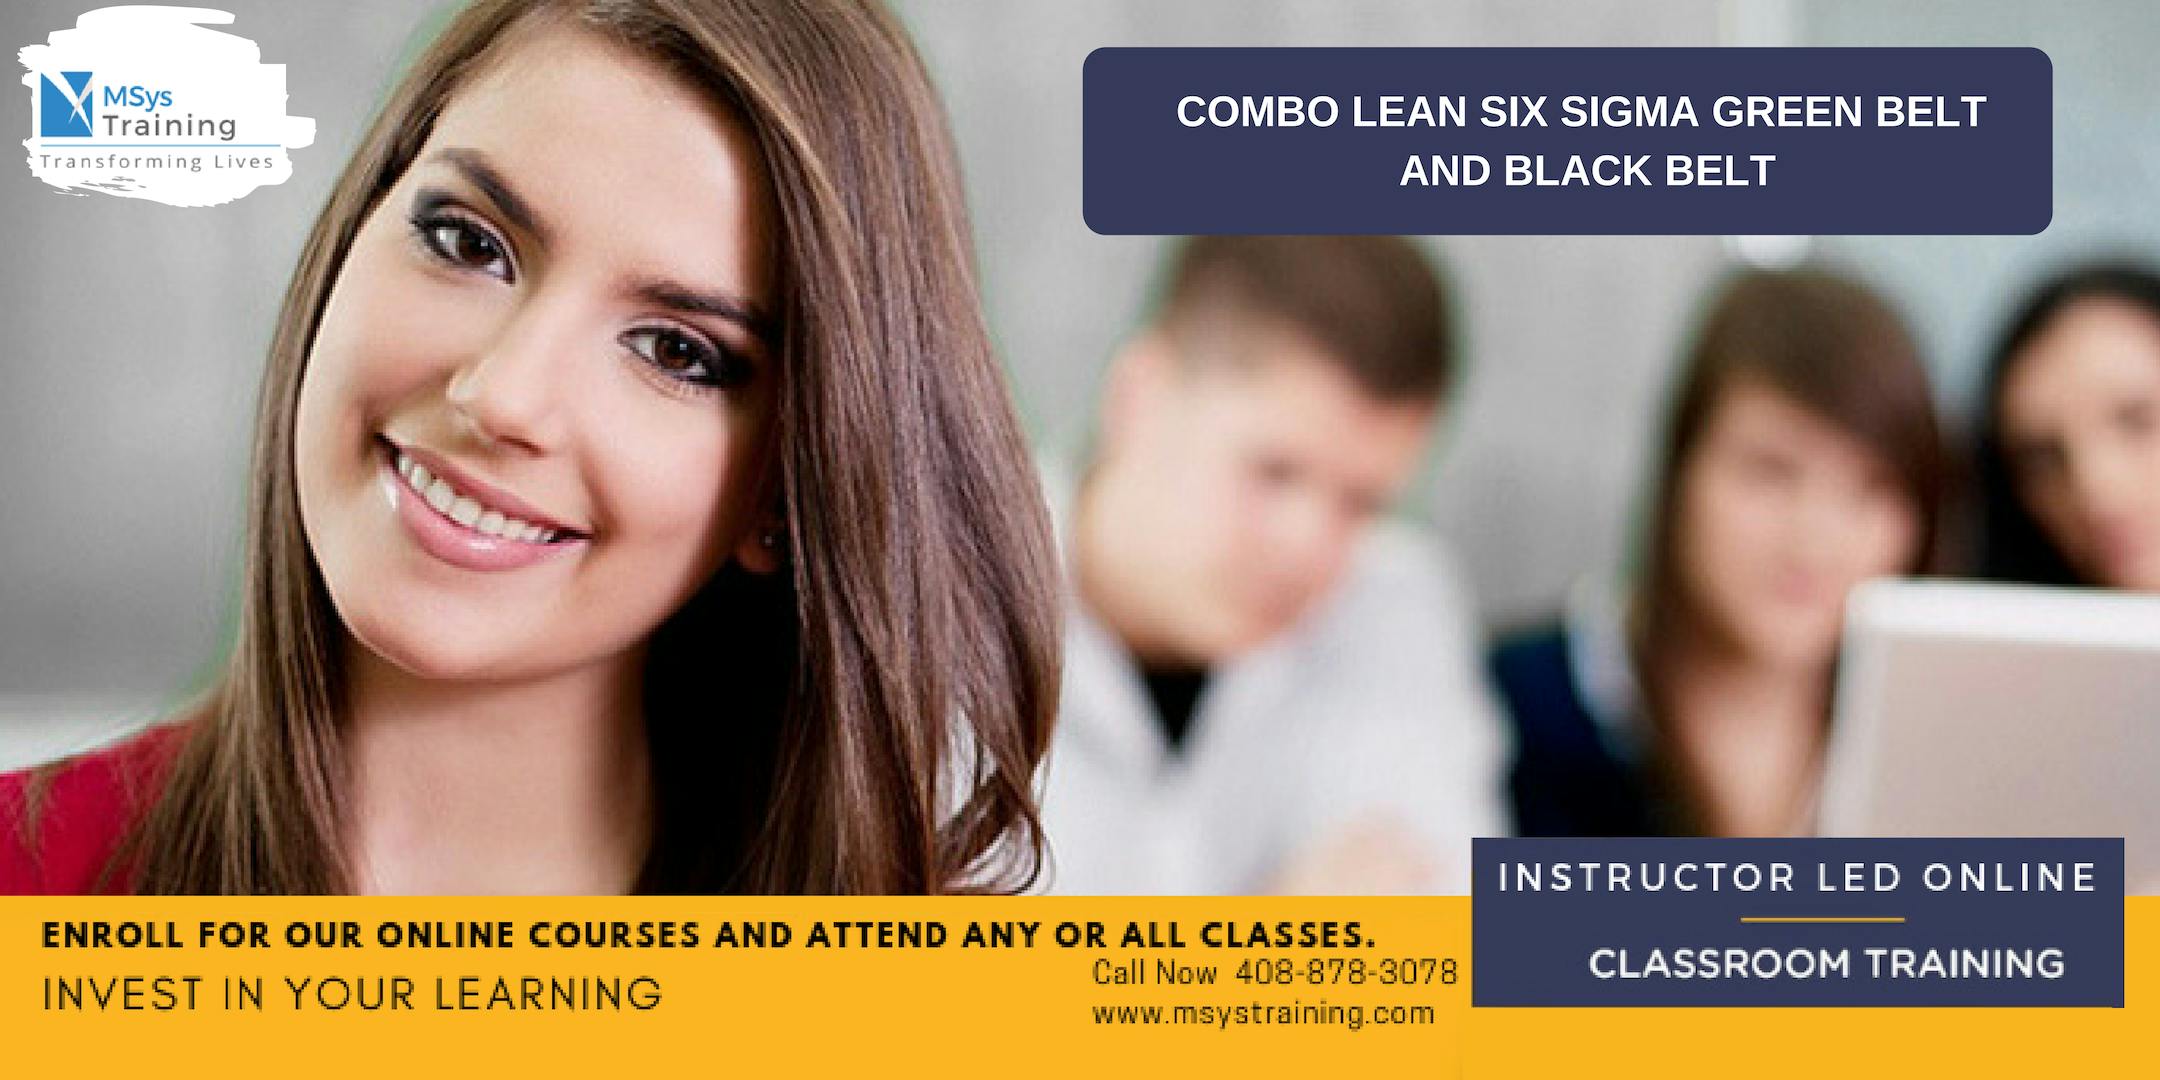 Combo Lean Six Sigma Green Belt and Black Belt Certification Training In Chihuahua, Chih